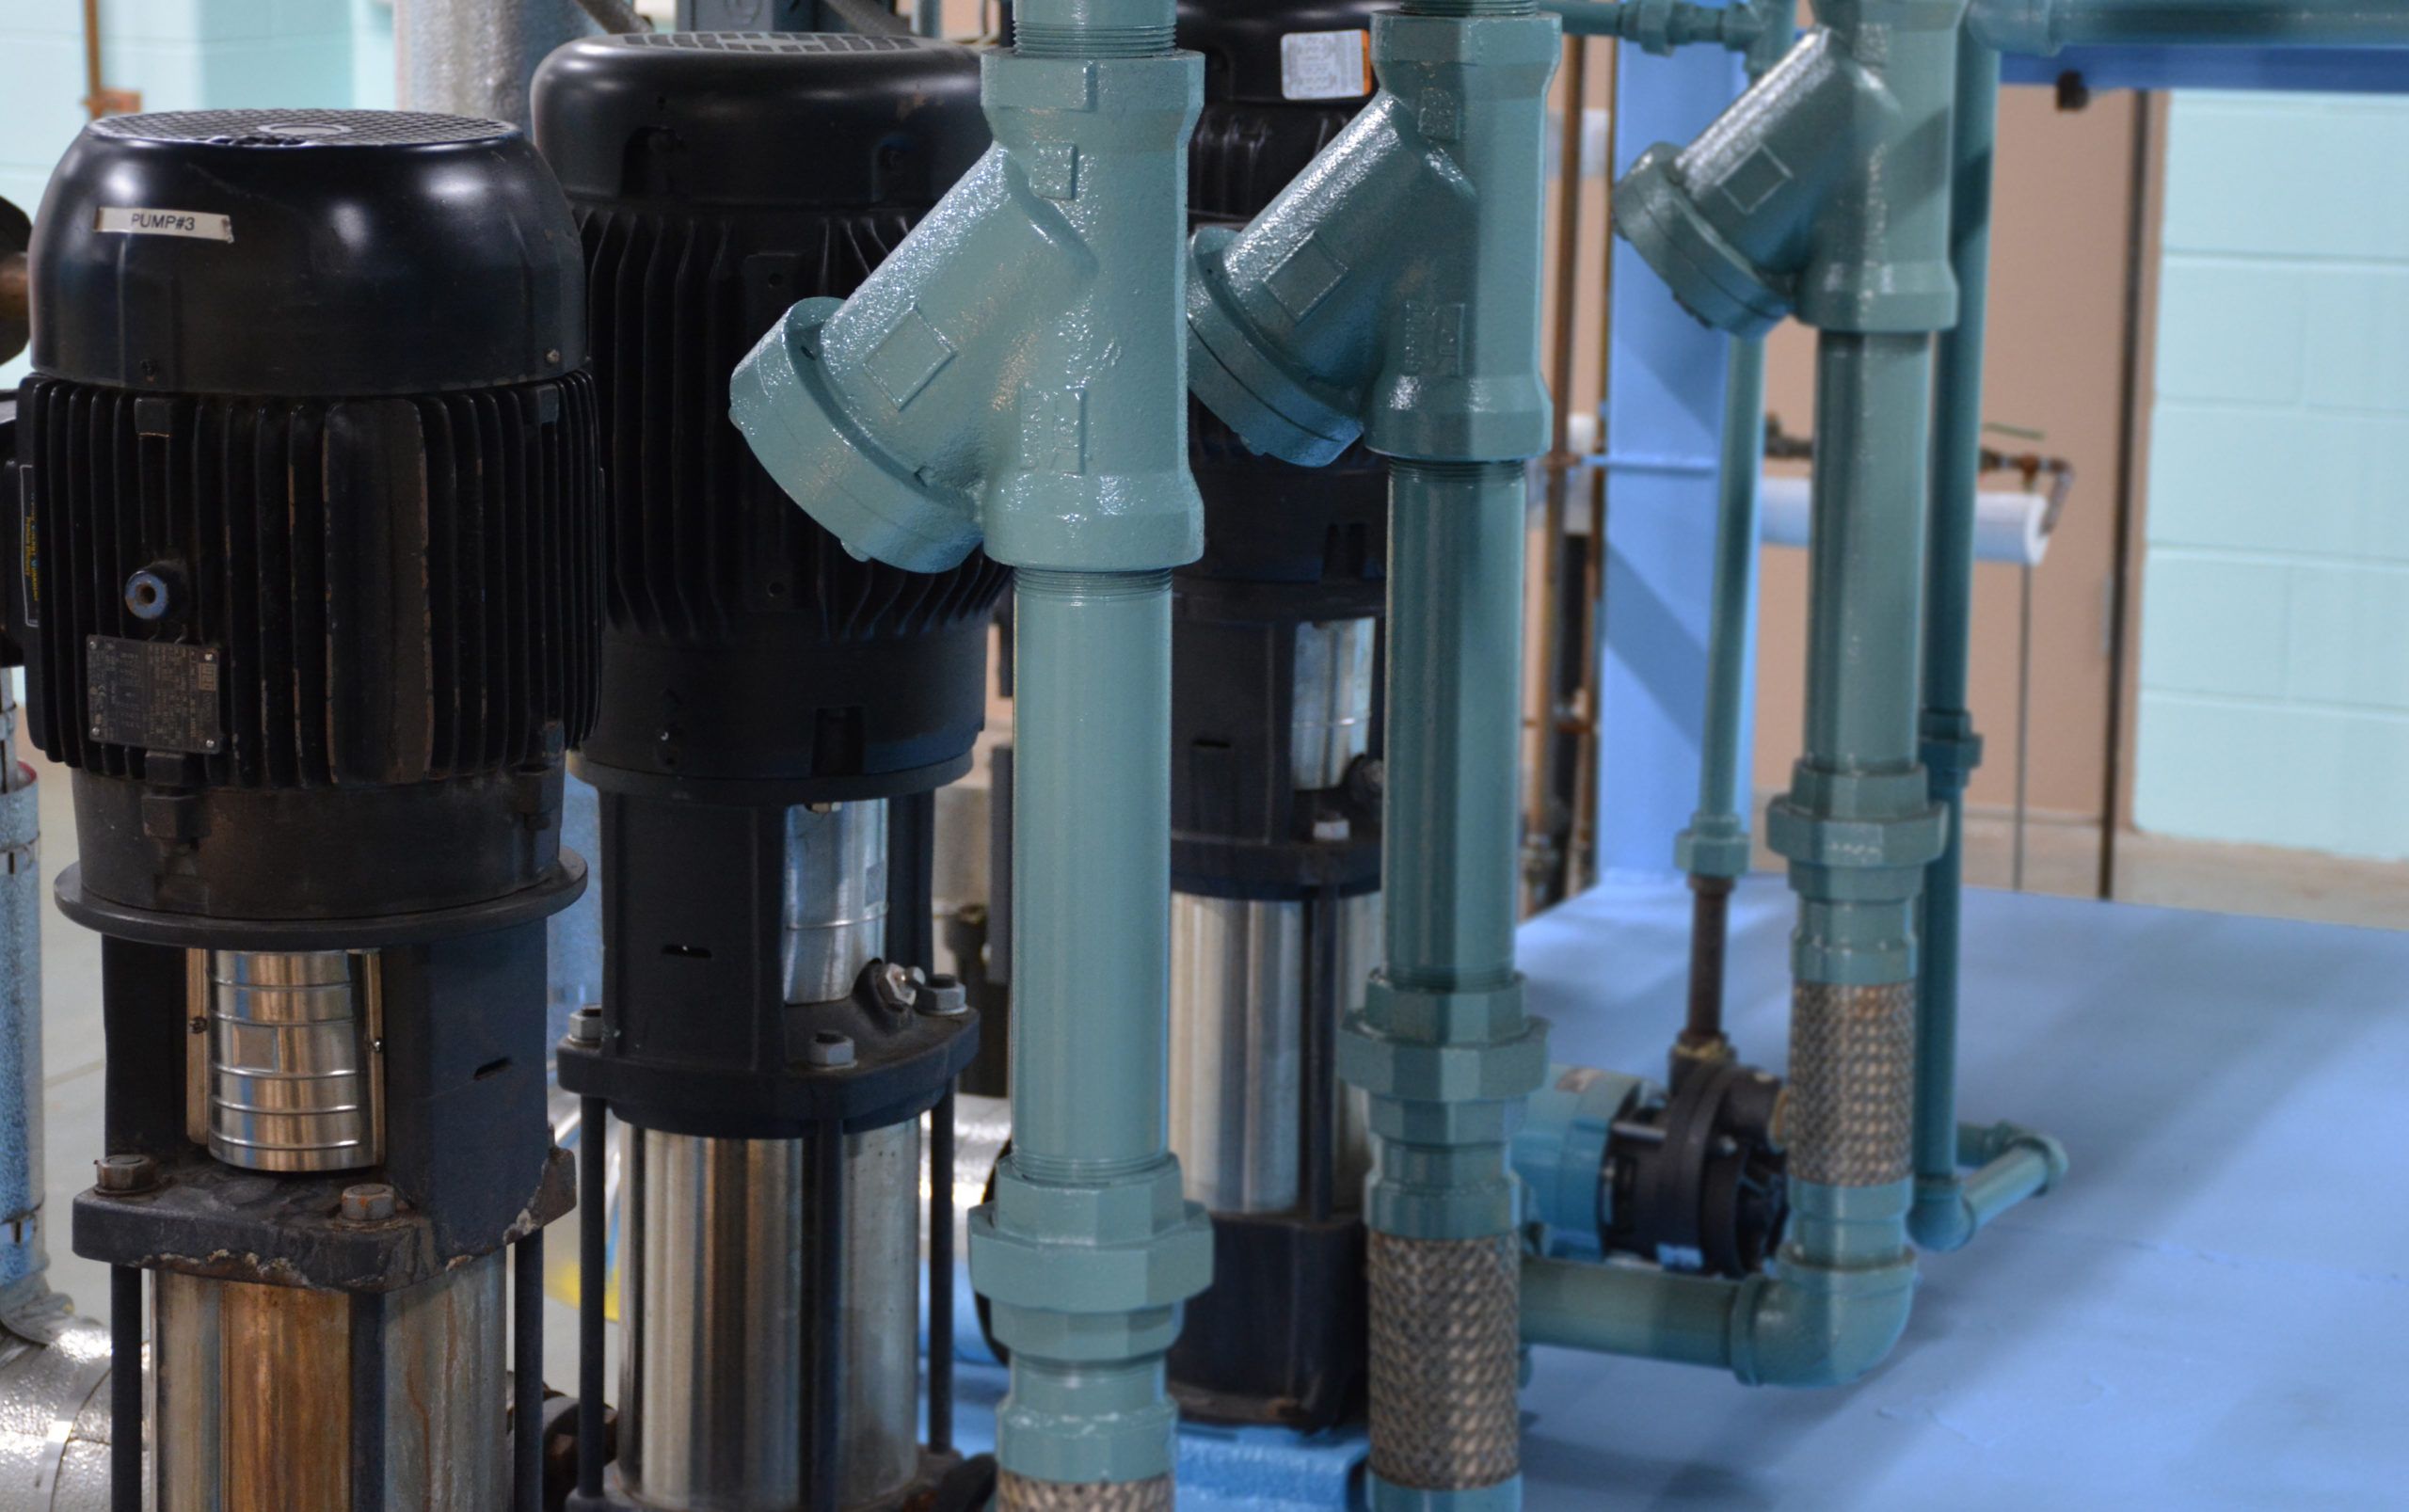 Feedwater pumps on a Cleaver Brooks Deaerator